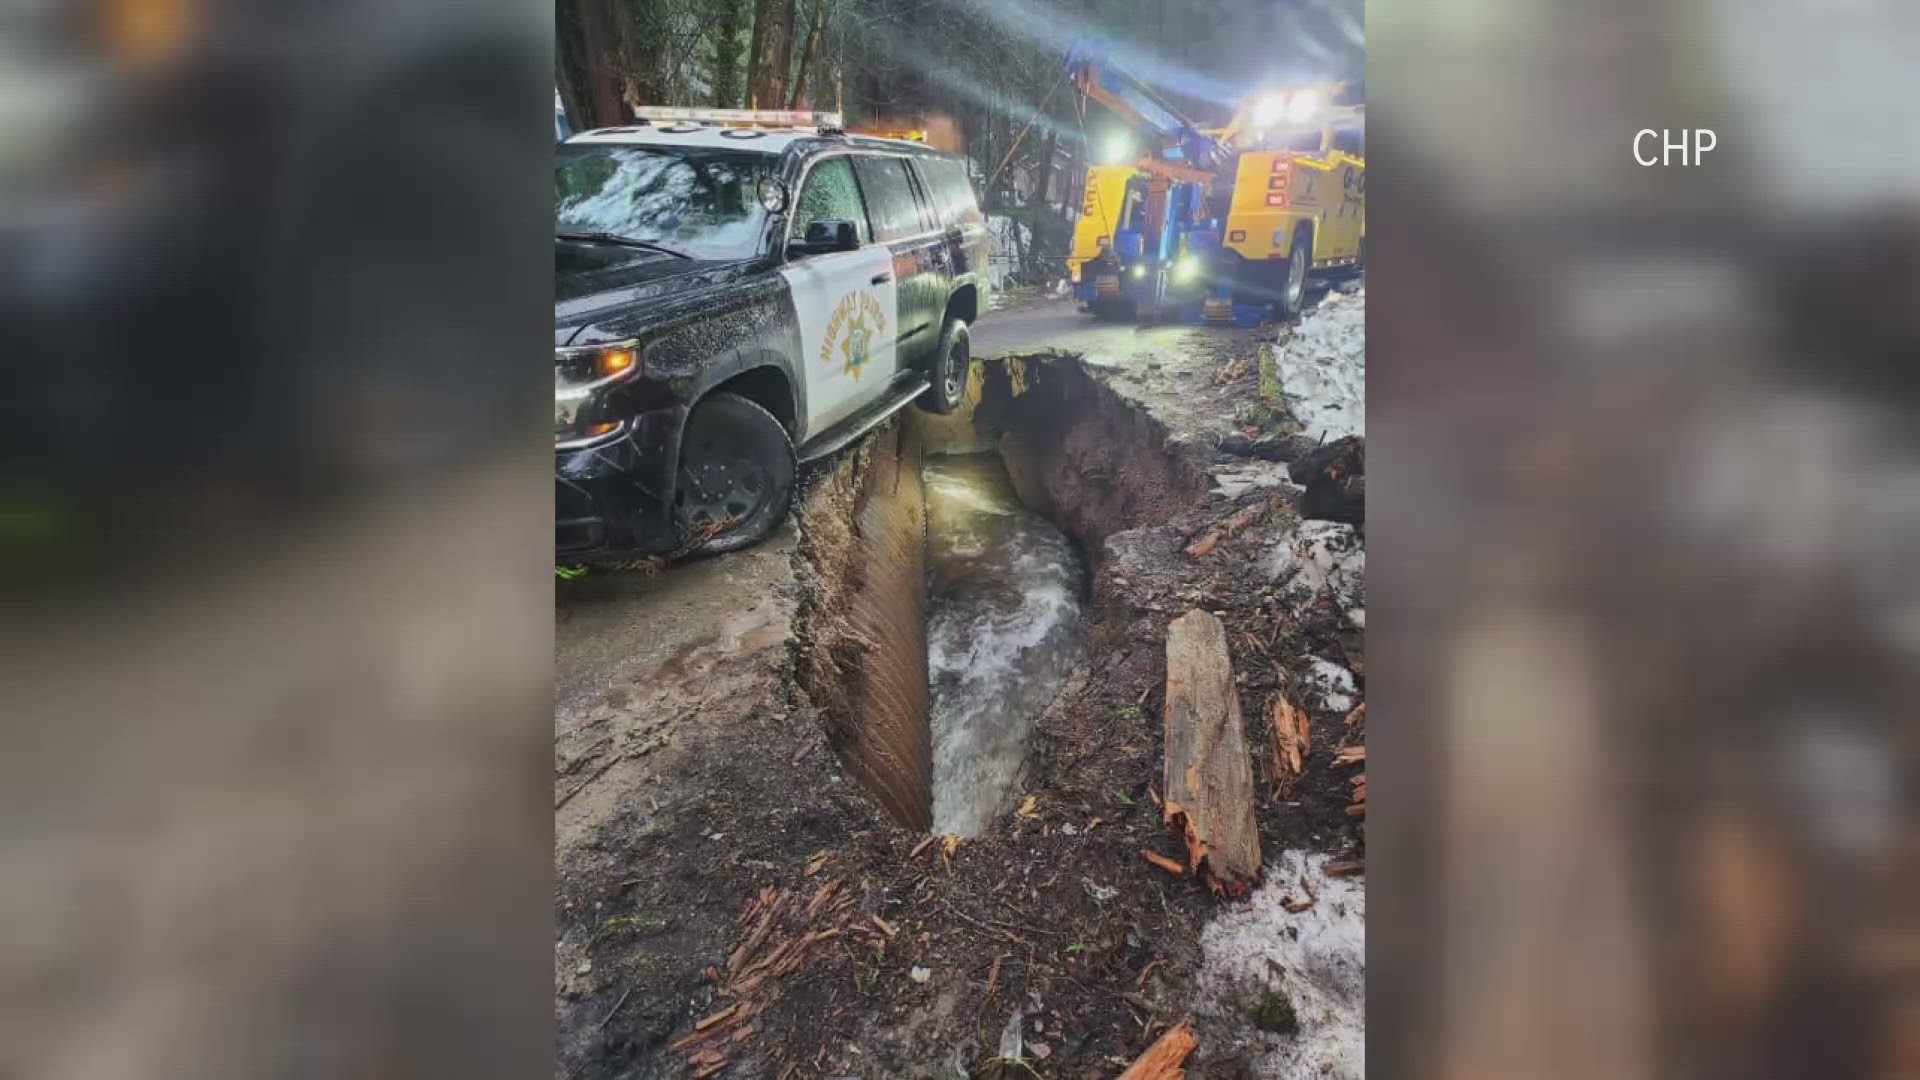 The impacts to Northern California's roads can sometimes cause problems for even the most experienced drivers.